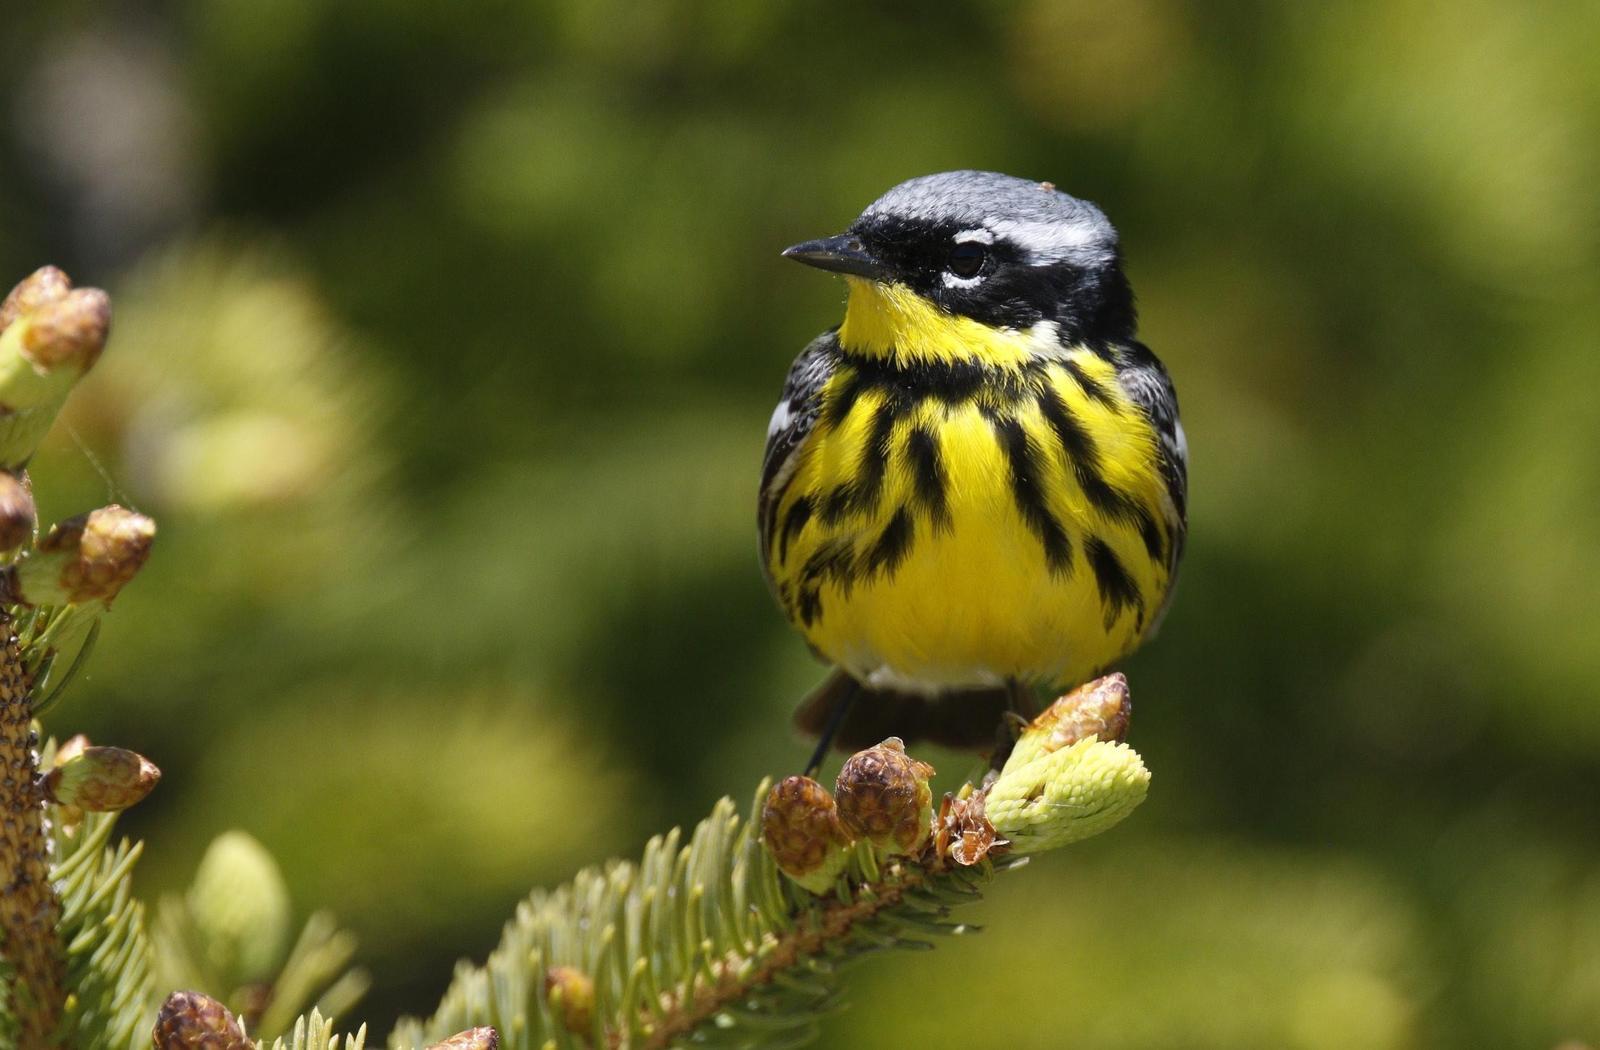 Magnolia Warbler Photo by Emily Willoughby